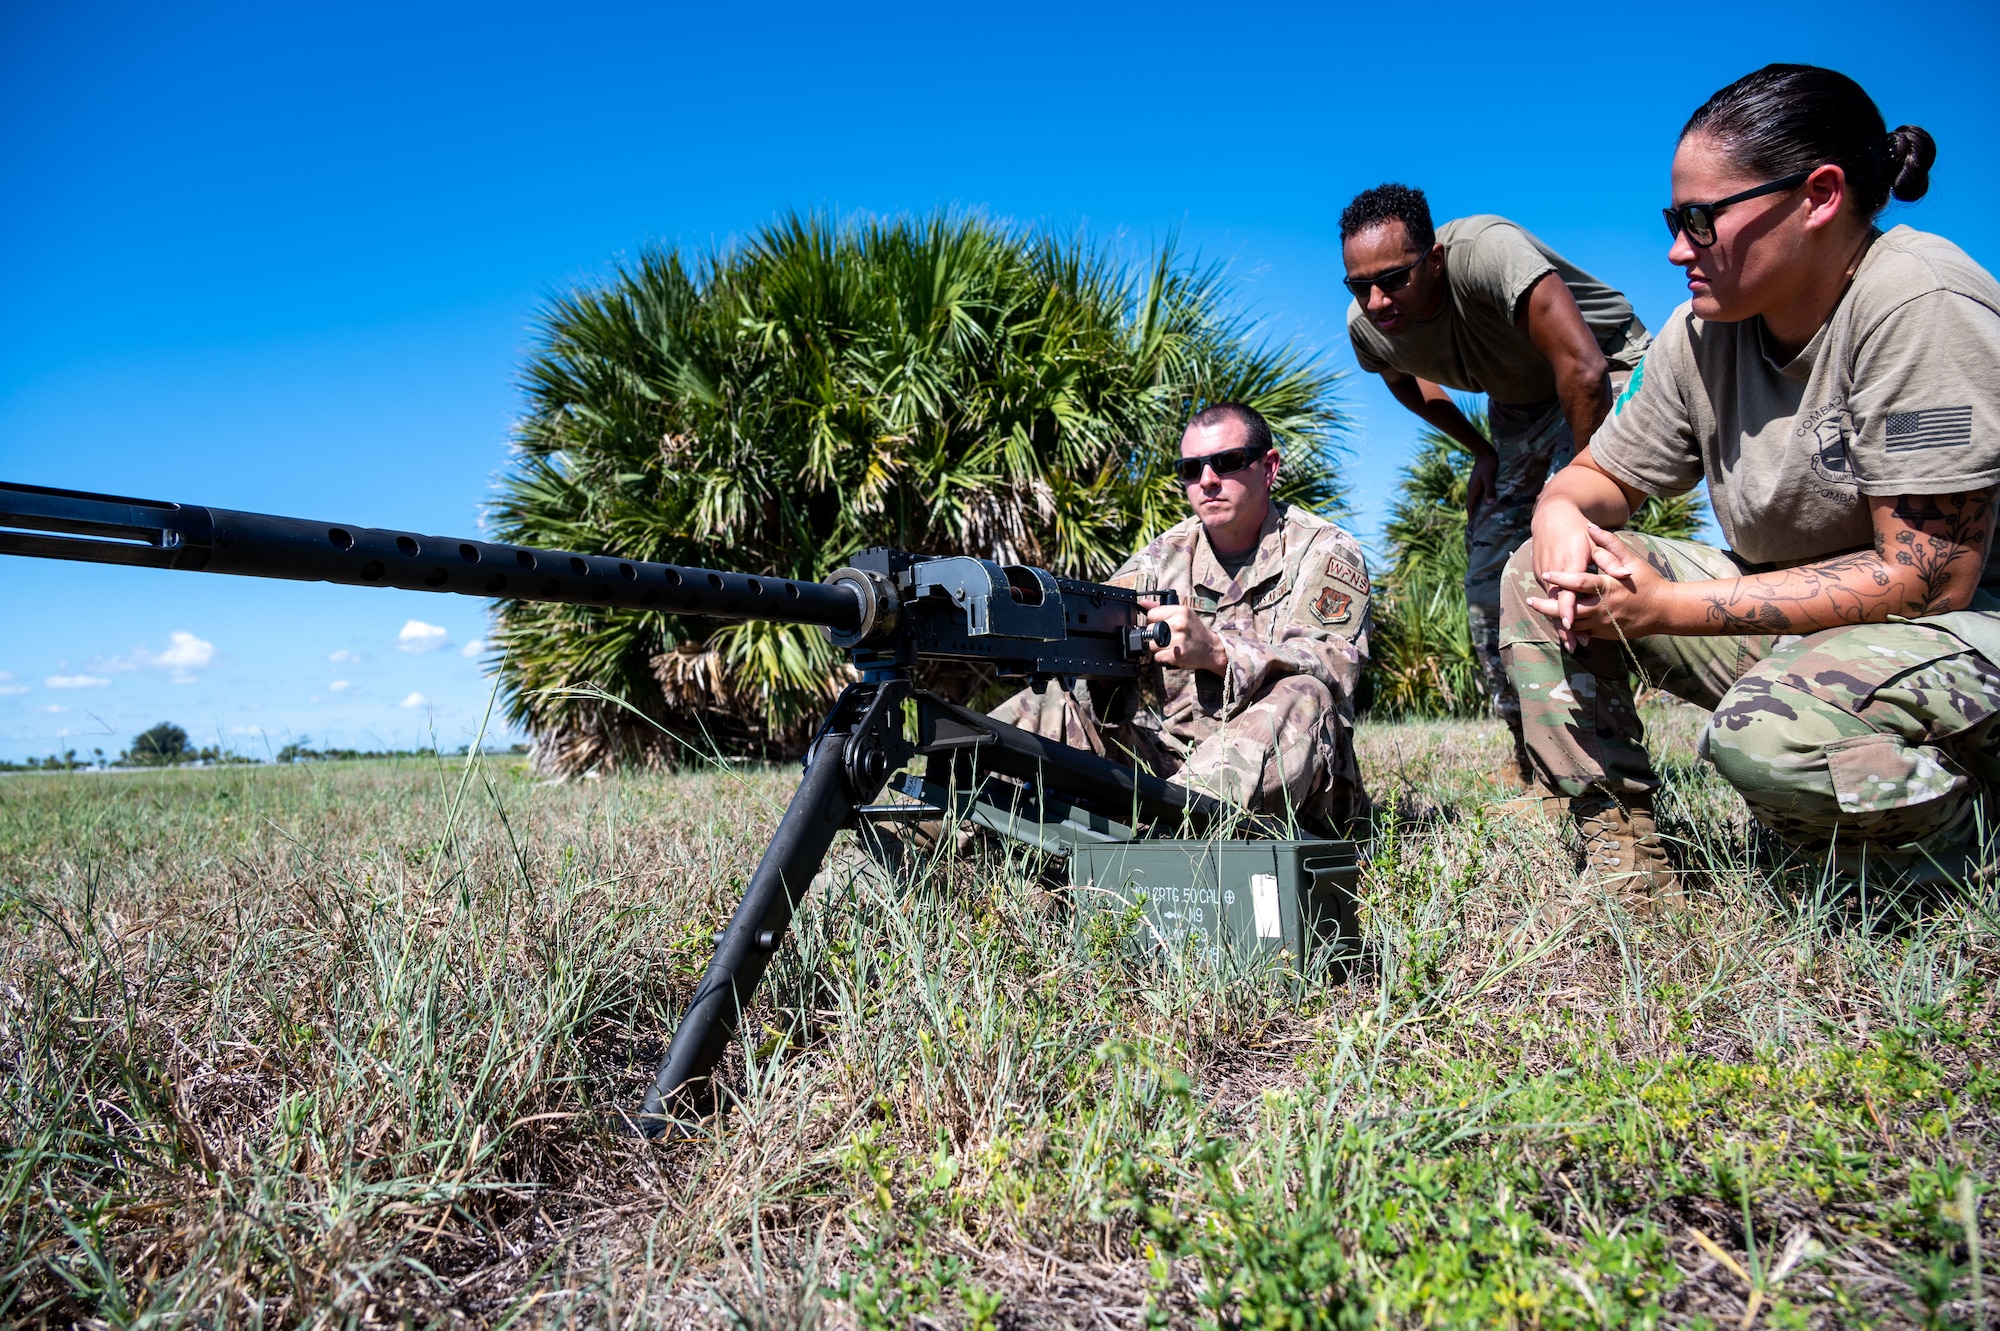 Technical Sgt. Tony Blaile, 920th Aircraft Maintenance Squadron weapons expeditor, Senior Airman Andrew Hernandez and Staff Sgt. Taylor Bender, 920th AMXS weapons load crew members, check the balance of a GAU-18 machine gun on the lightweight tripod mount helicopter Aug. 6, 2022 at Patrick Space Force Base, Florida. (U.S. Air Force photo by Master Sgt. Kelly Goonan)